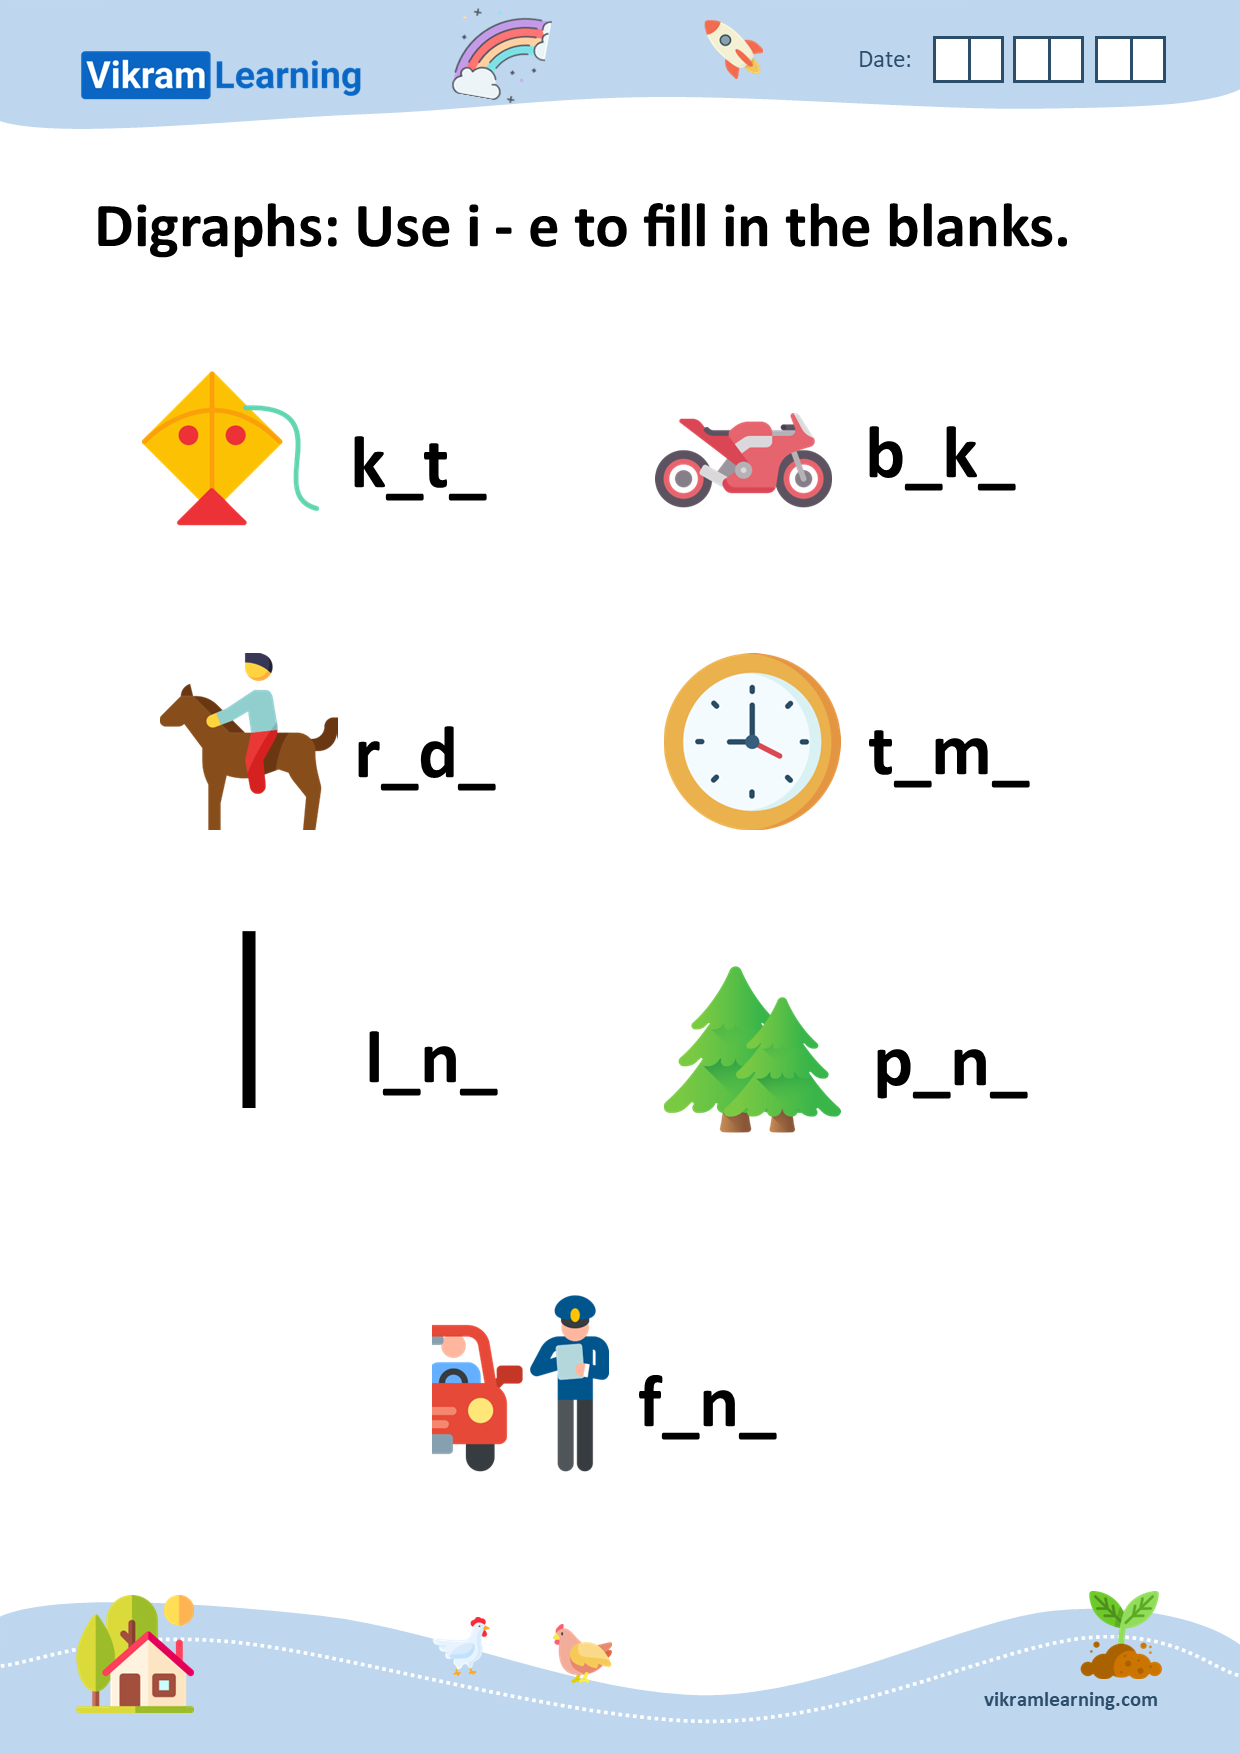 Download digraphs: use i - e to fill in the blanks worksheets